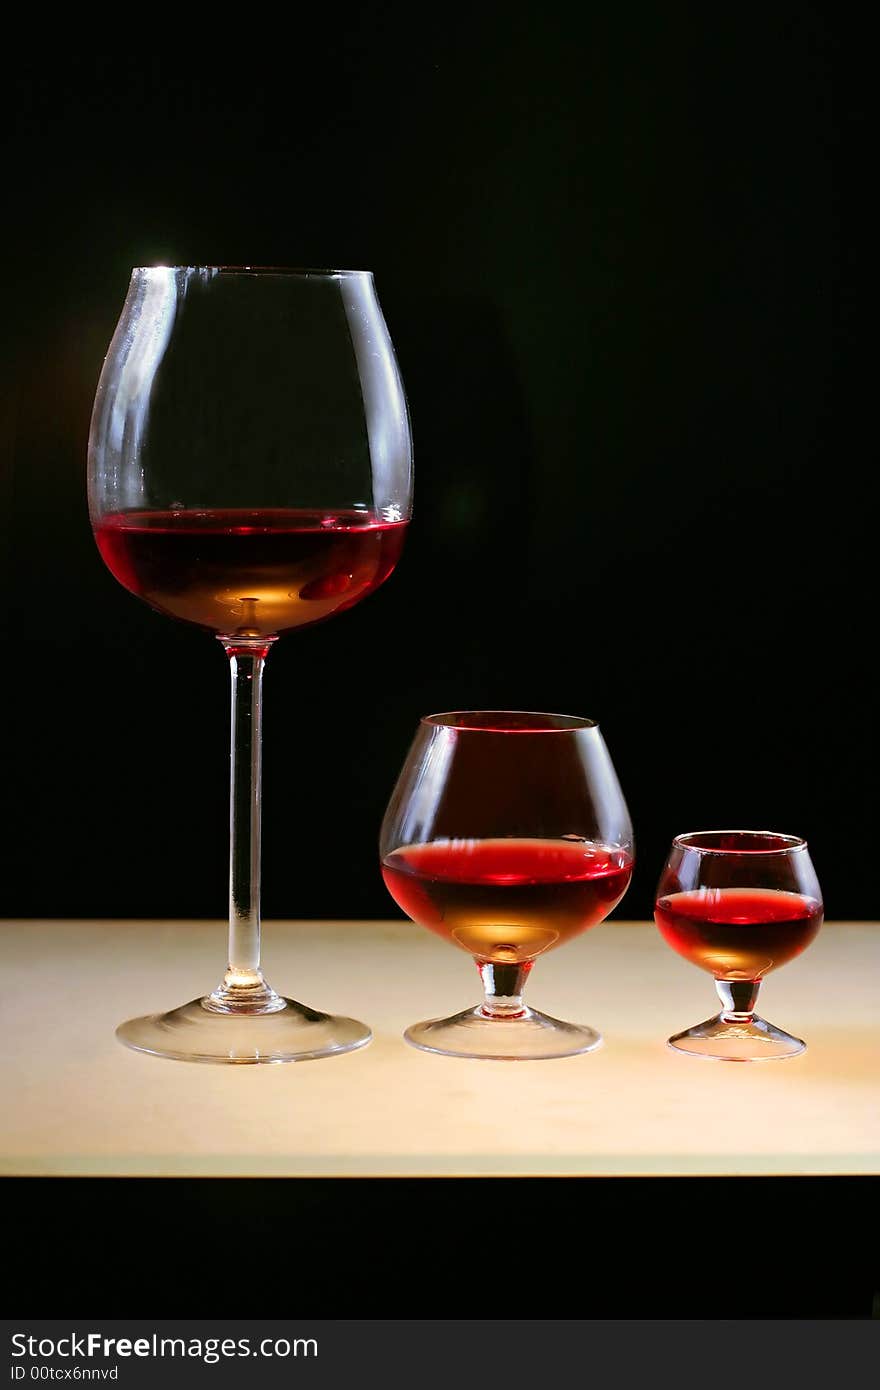 Three glasses of red wine or cognac on lighting bar and on black background.